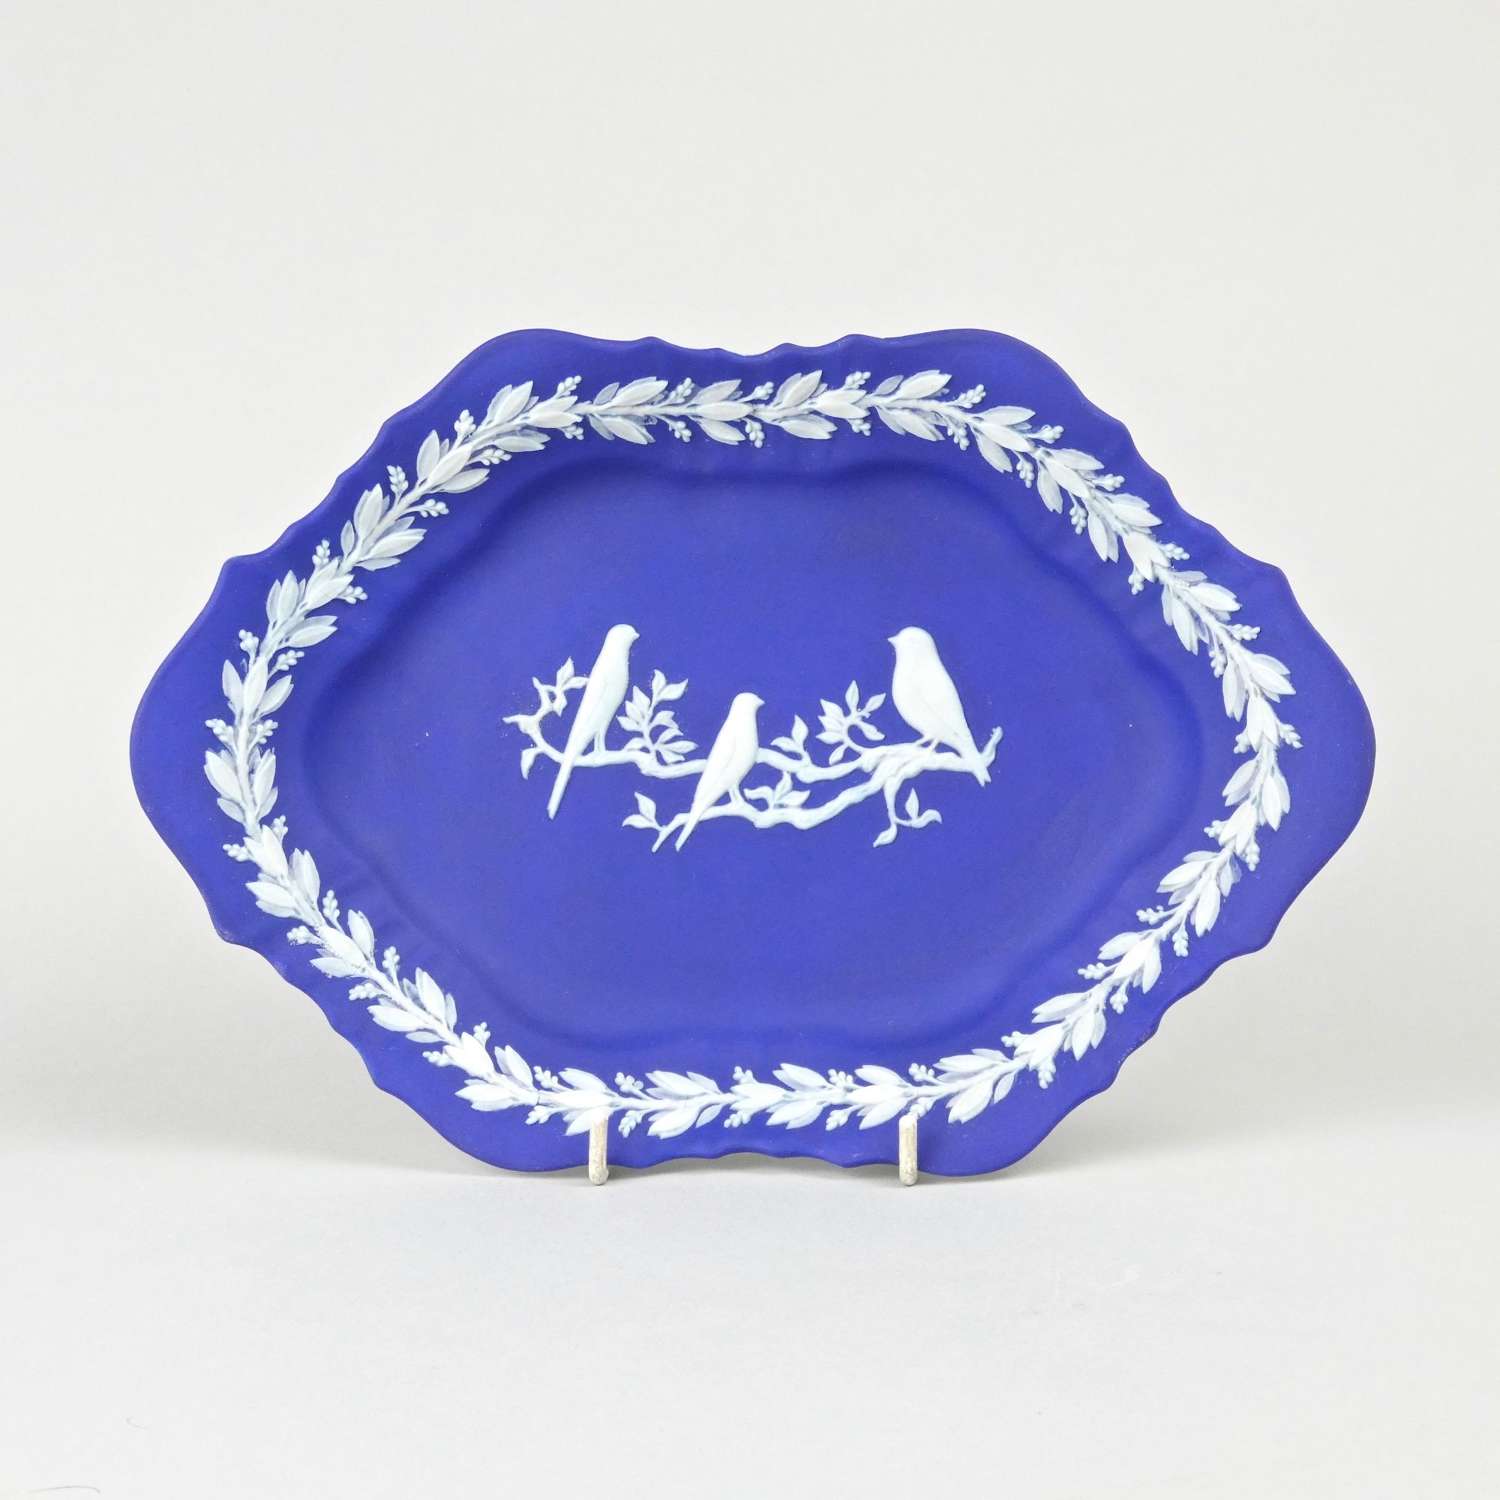 Wedgwood tray made for Caperns